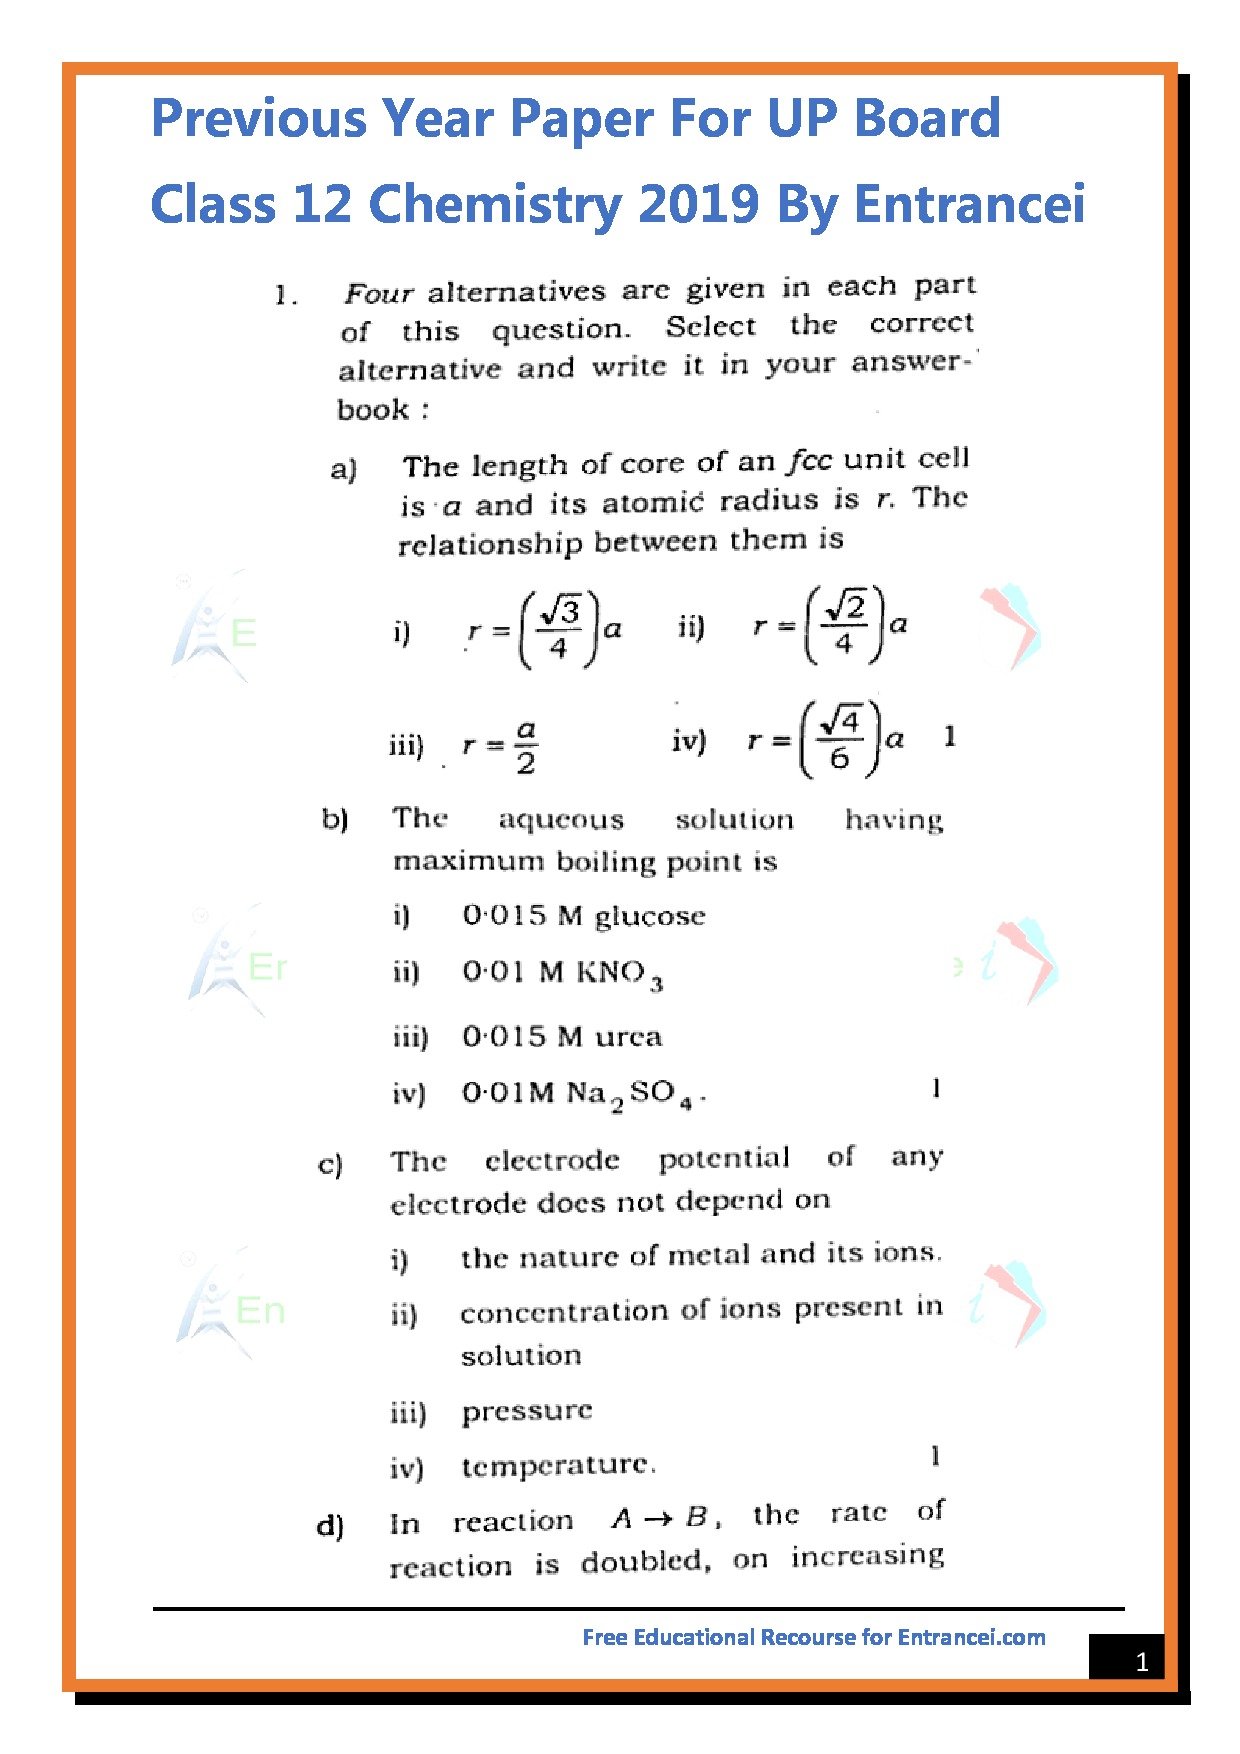 UP Board Class 12 Previous Years Chemistry 2019 Question Paper